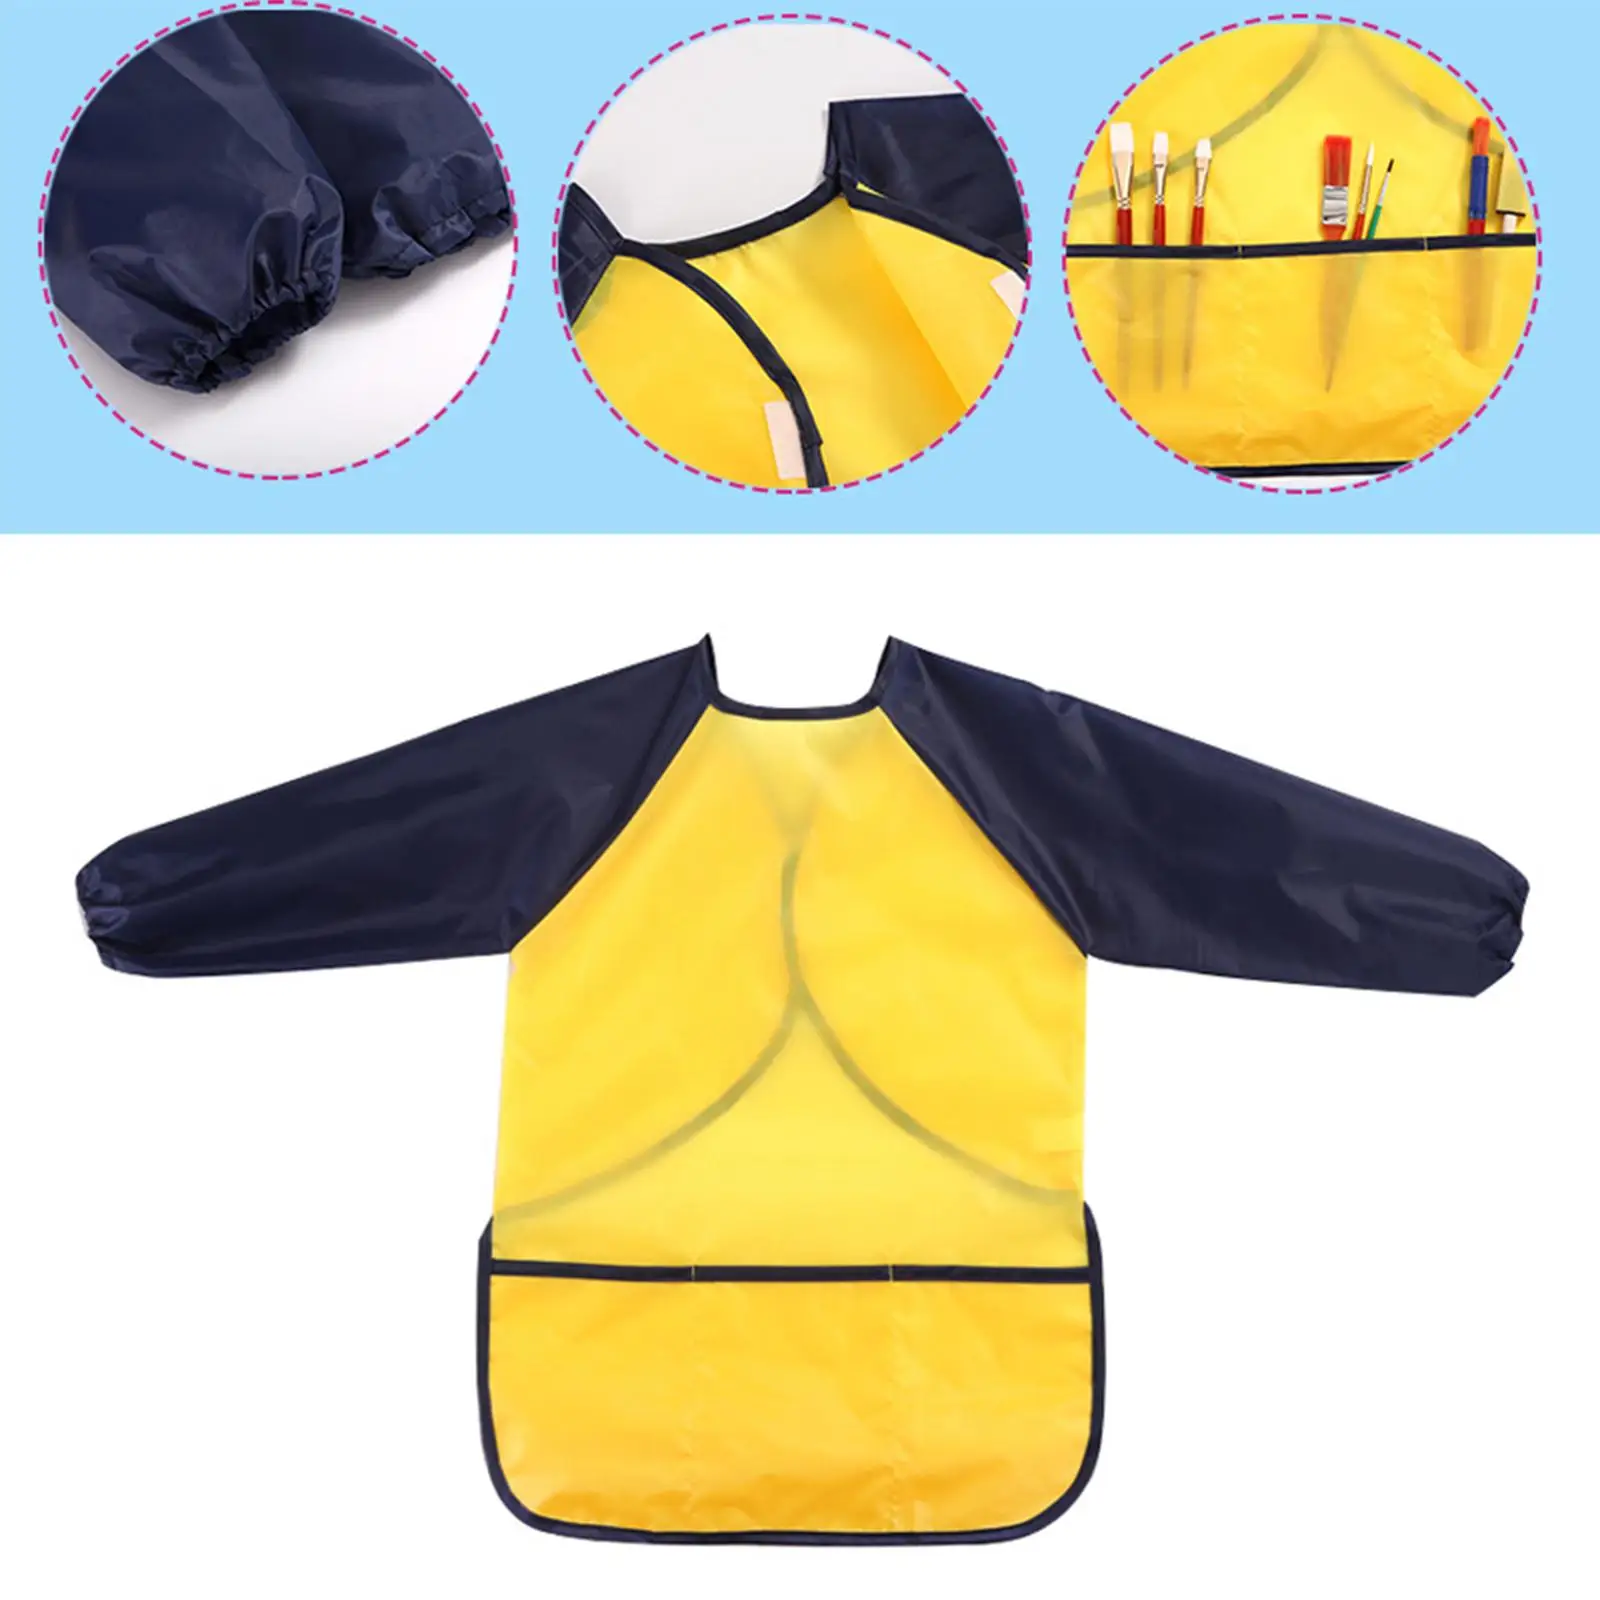 Long Sleeve Kids Smock Art Painting Apron with 3 Pocket for Toddler Baby